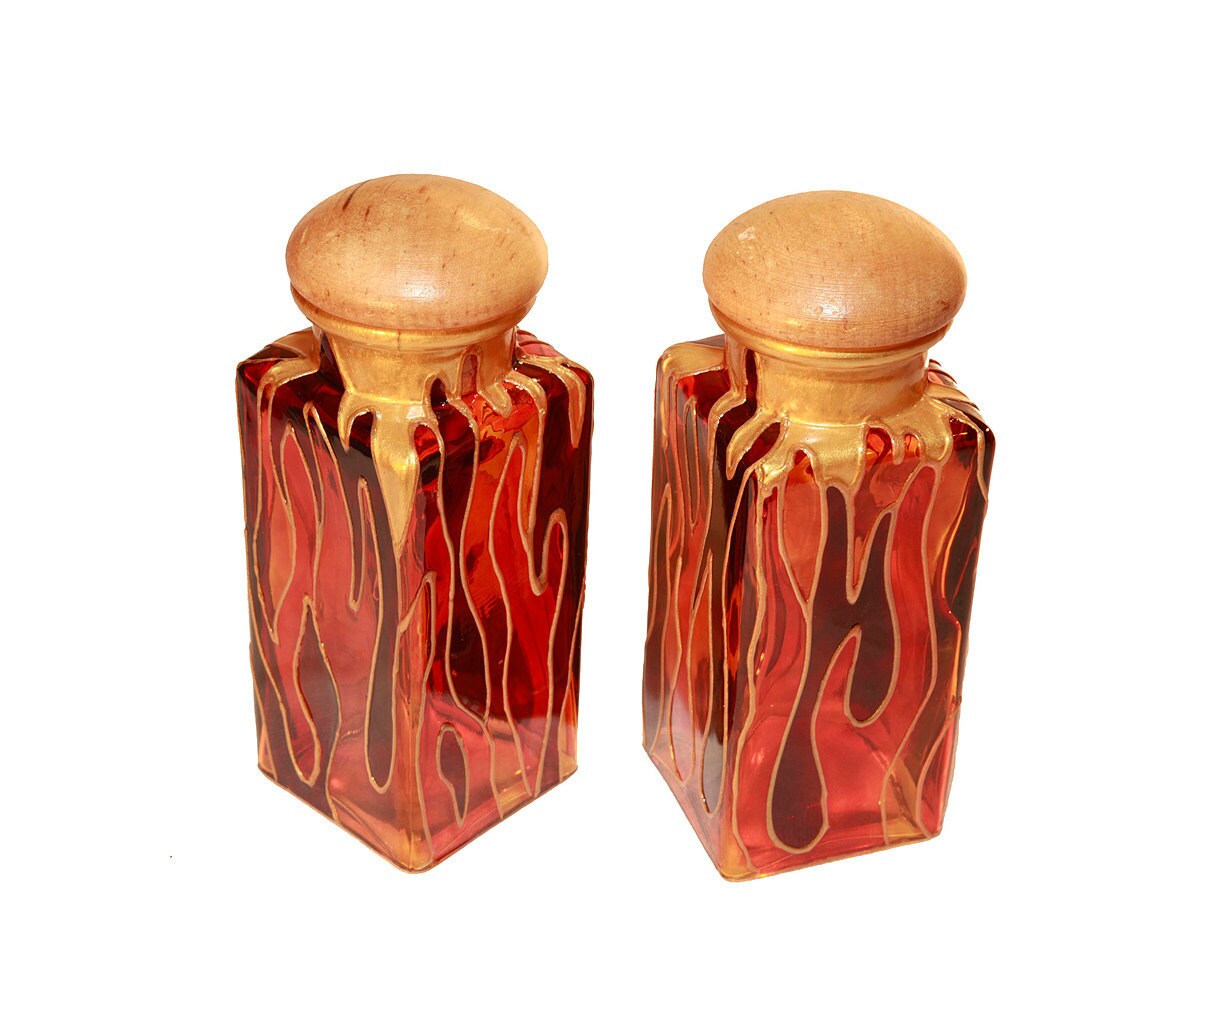 Hand Painted Spice Bottle With Flames- Decorative Glass Art